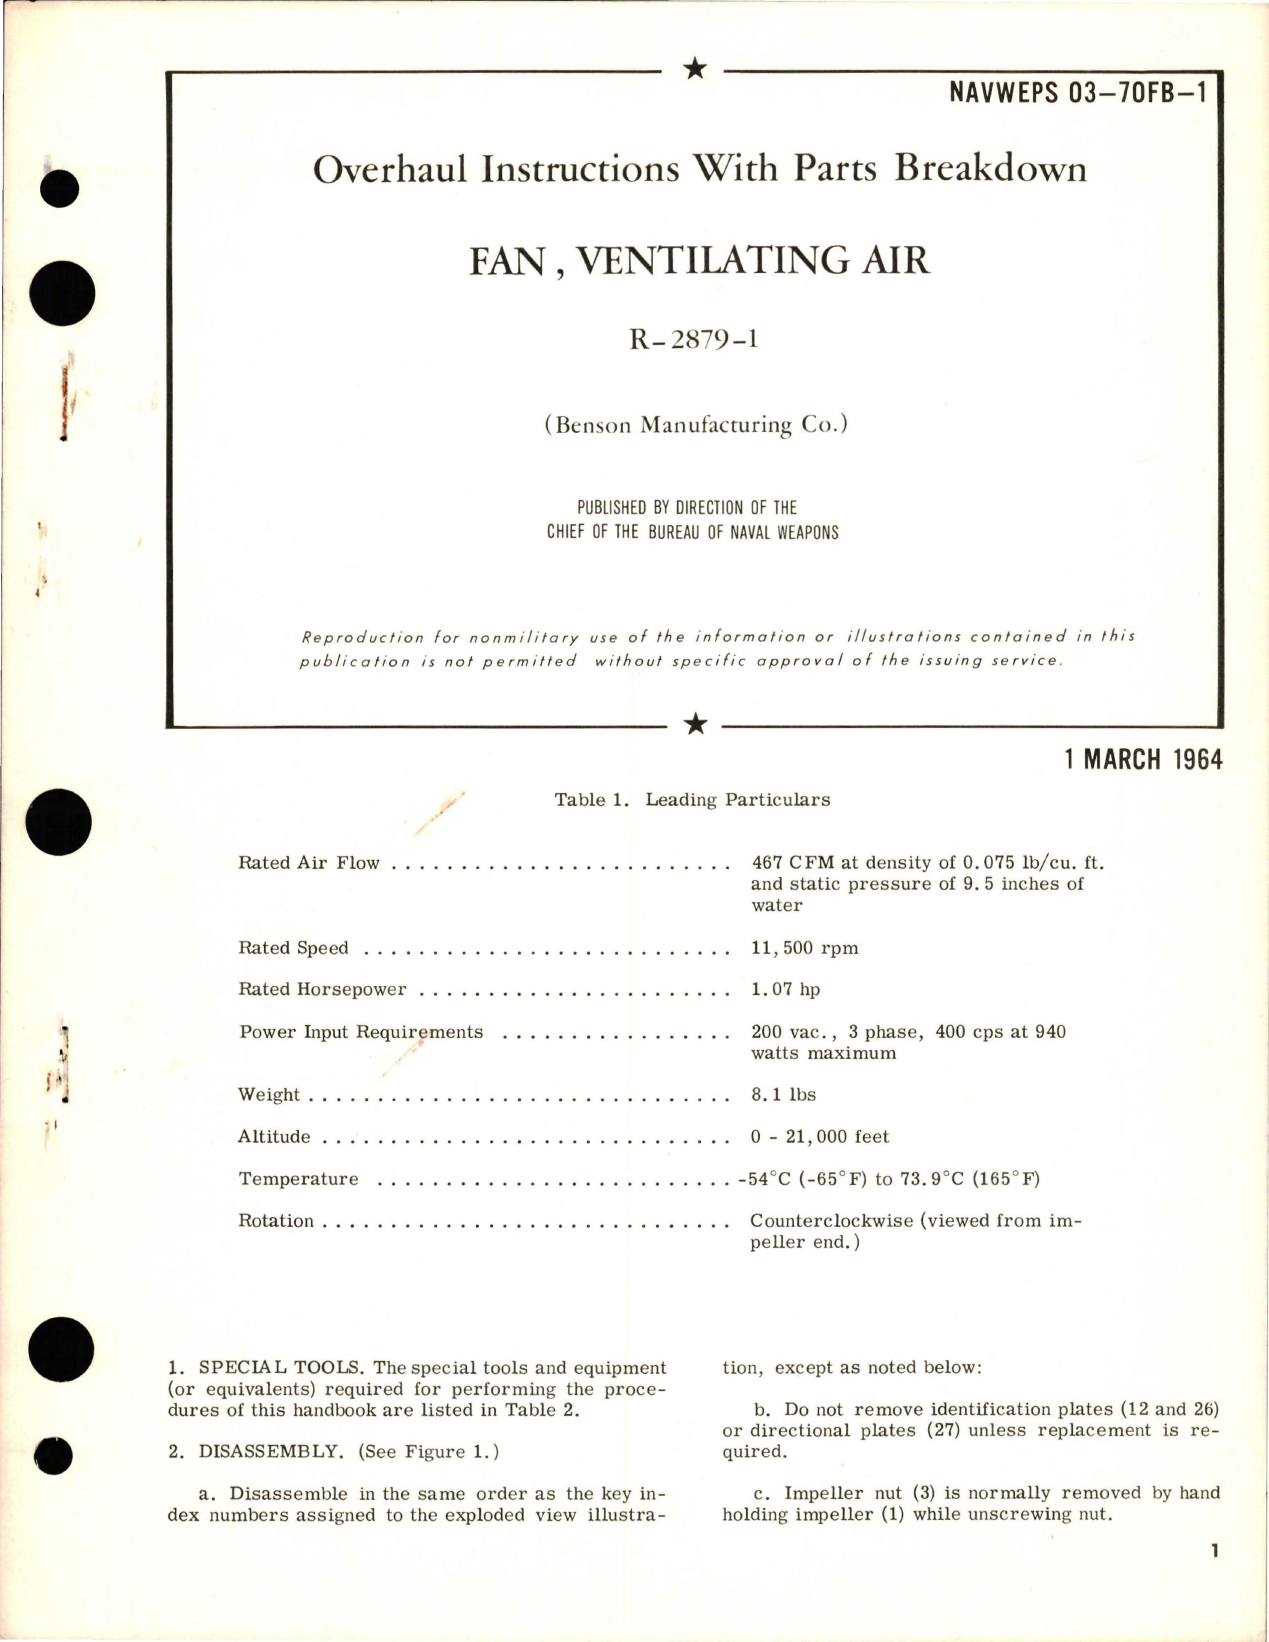 Sample page 1 from AirCorps Library document: Overhaul Instructions with Parts Breakdown for Ventilating Air Fan - R-2879-1